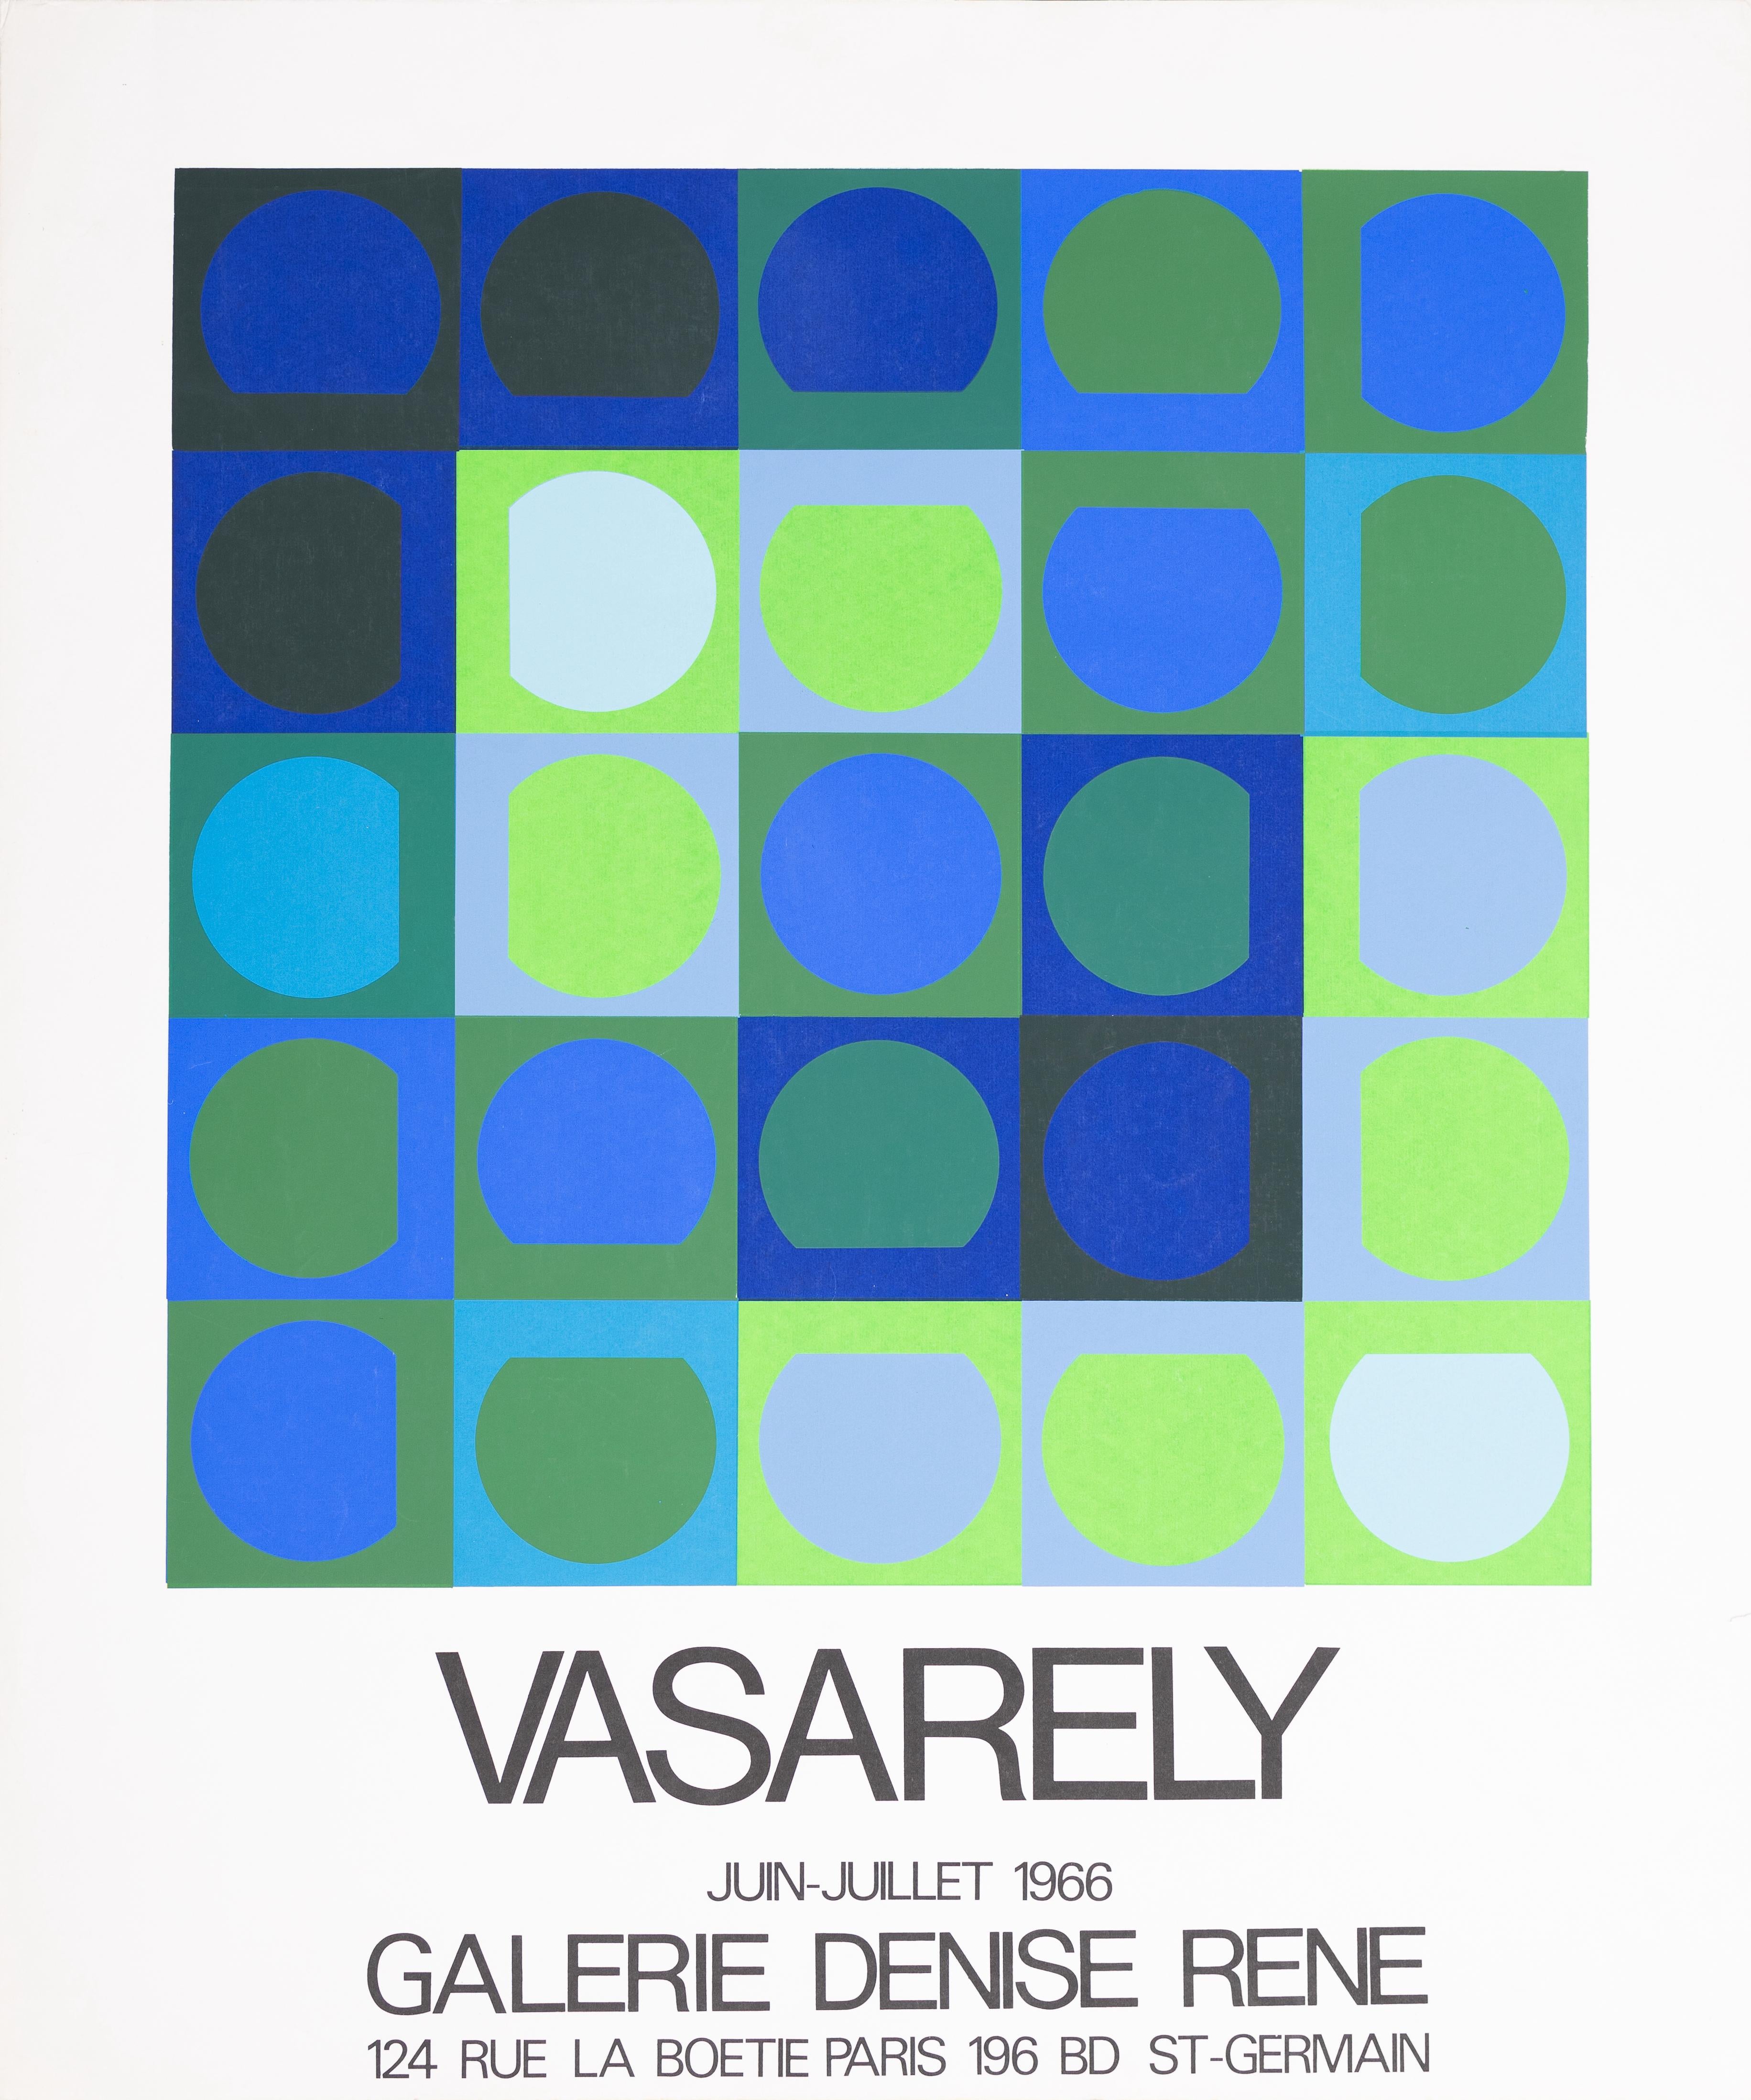 Victor Vasarely Abstract Print - Galerie Denise Rene 